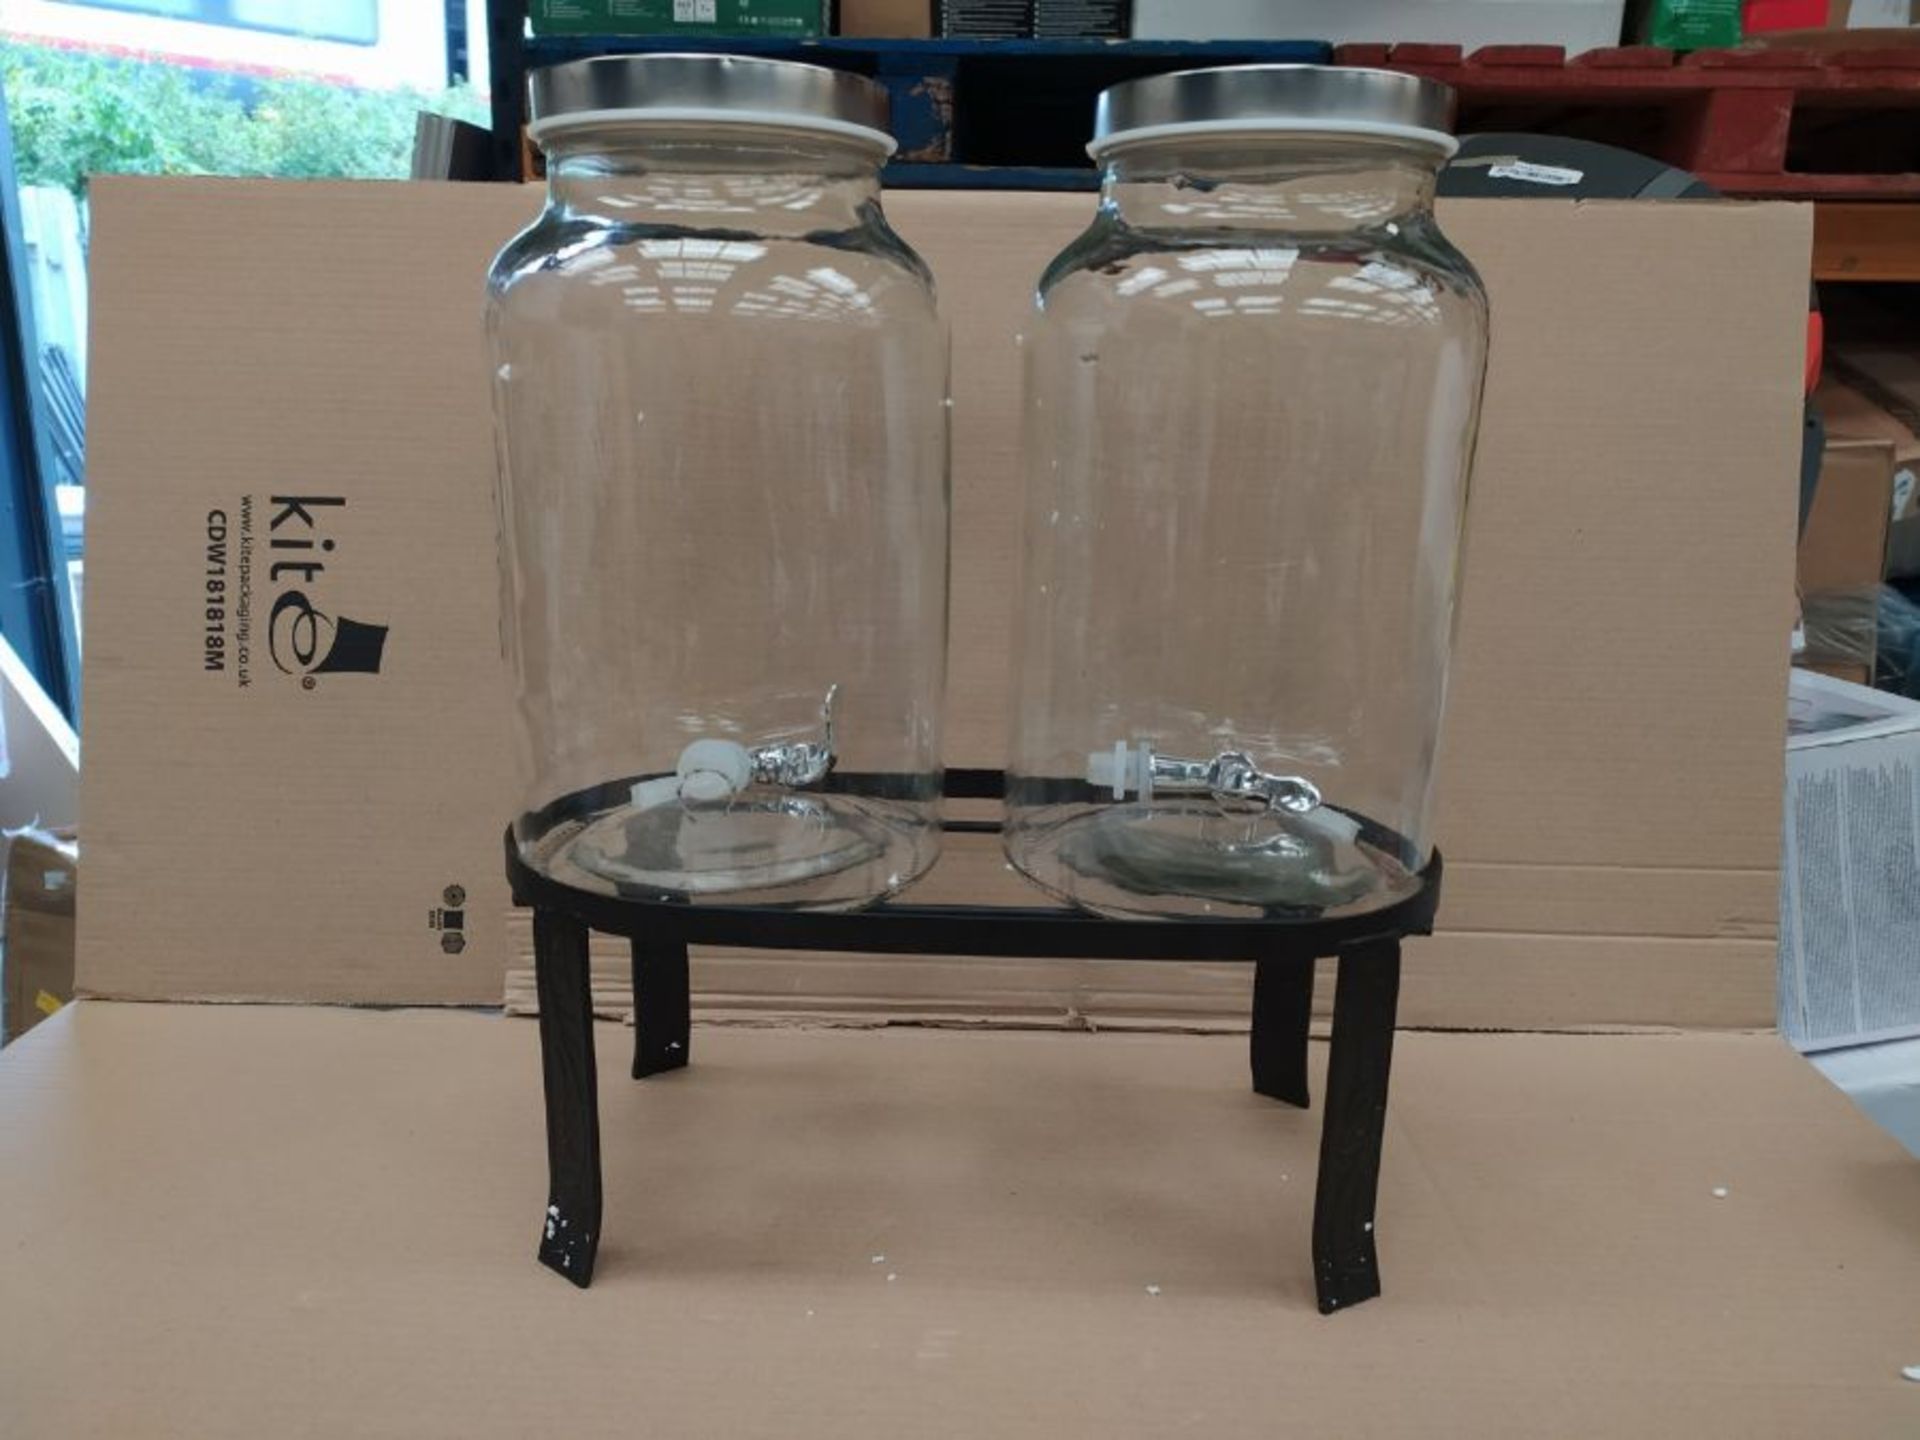 Dual Mason Jar Drinks Dispenser with Stand 352oz / 10ltr | bar@drinkstuff Double Bever - Image 3 of 3